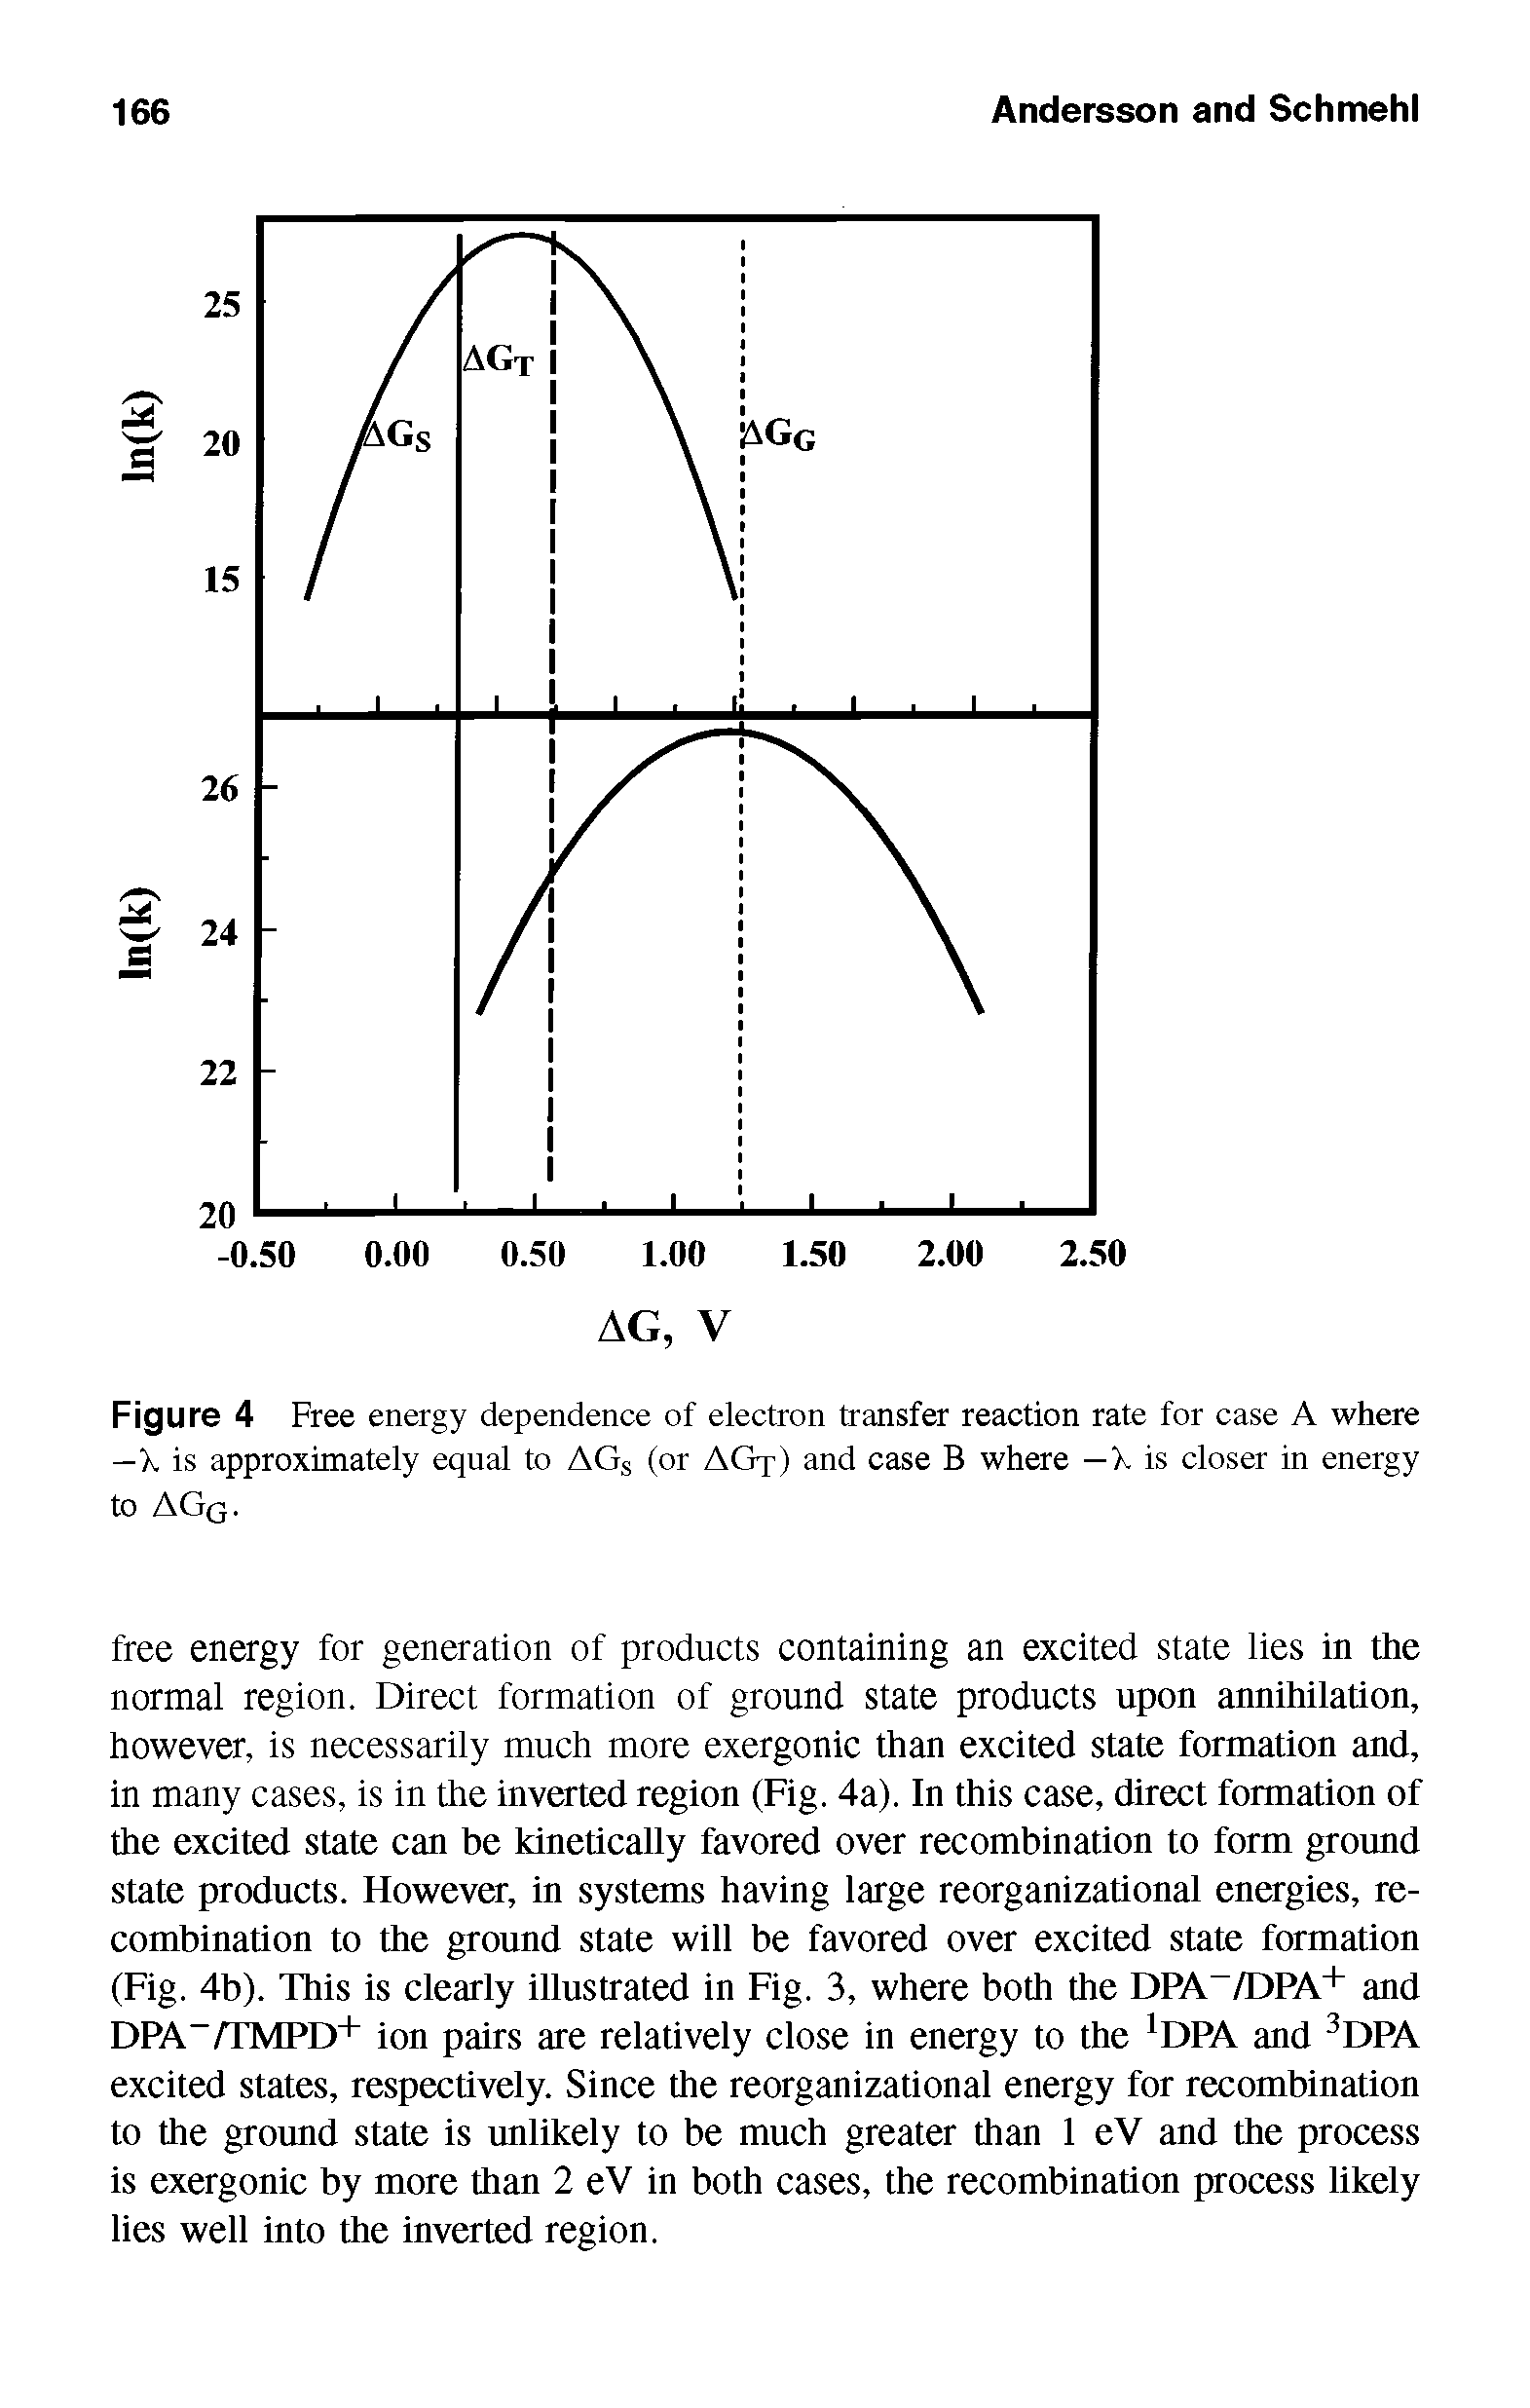 Figure 4 Free energy dependence of electron transfer reaction rate for case A where —X is approximately equal to AGS (or AGp) and case B where —X is closer in energy to AGq.